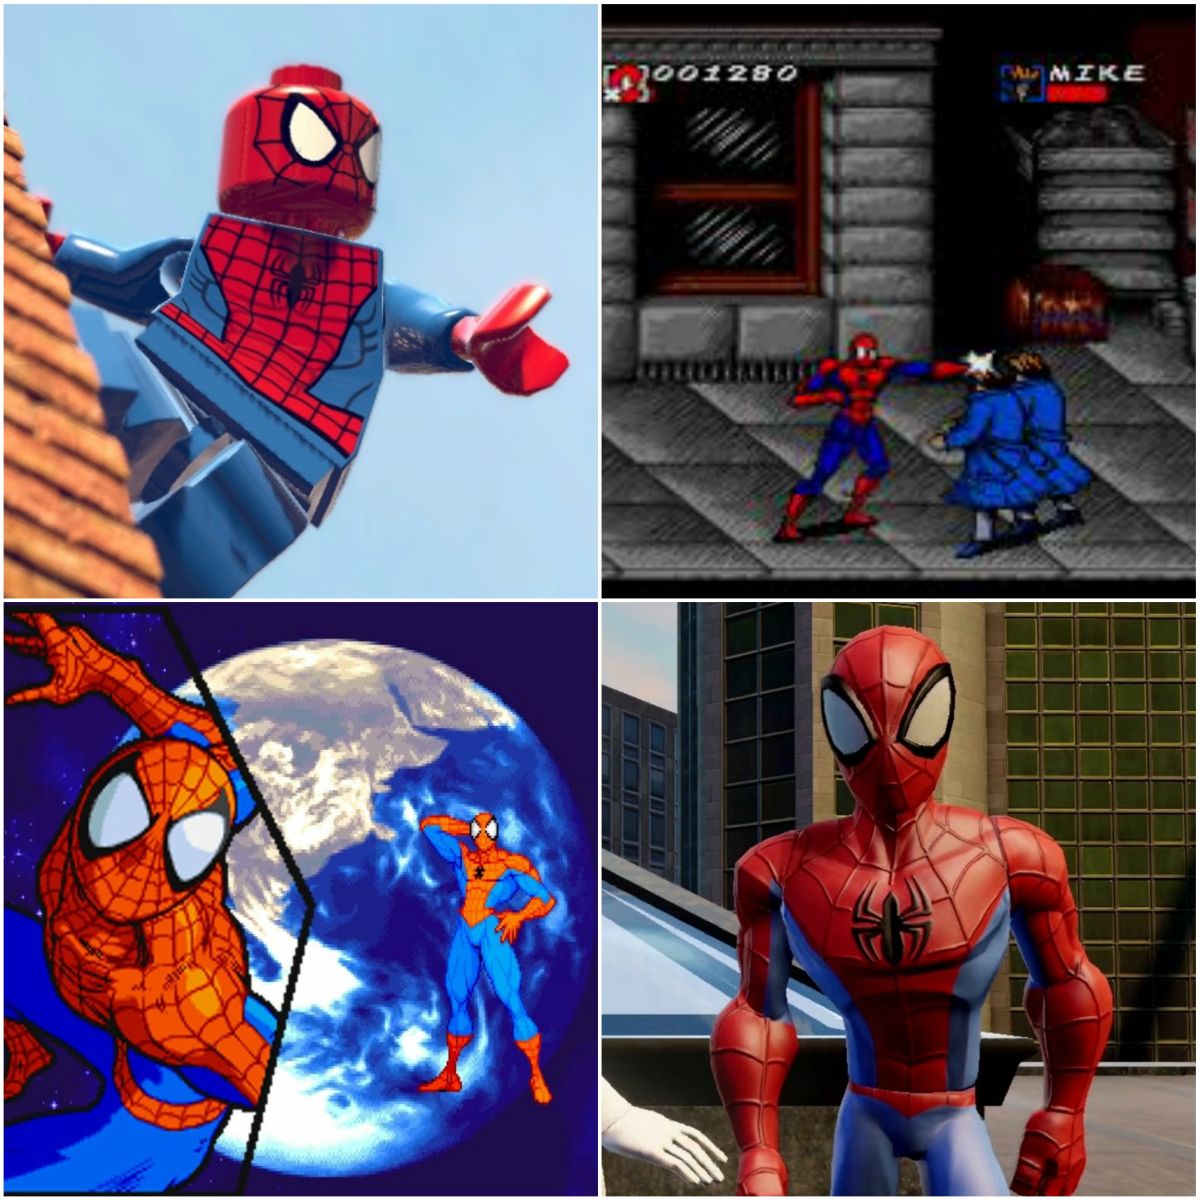 Other video game appearances